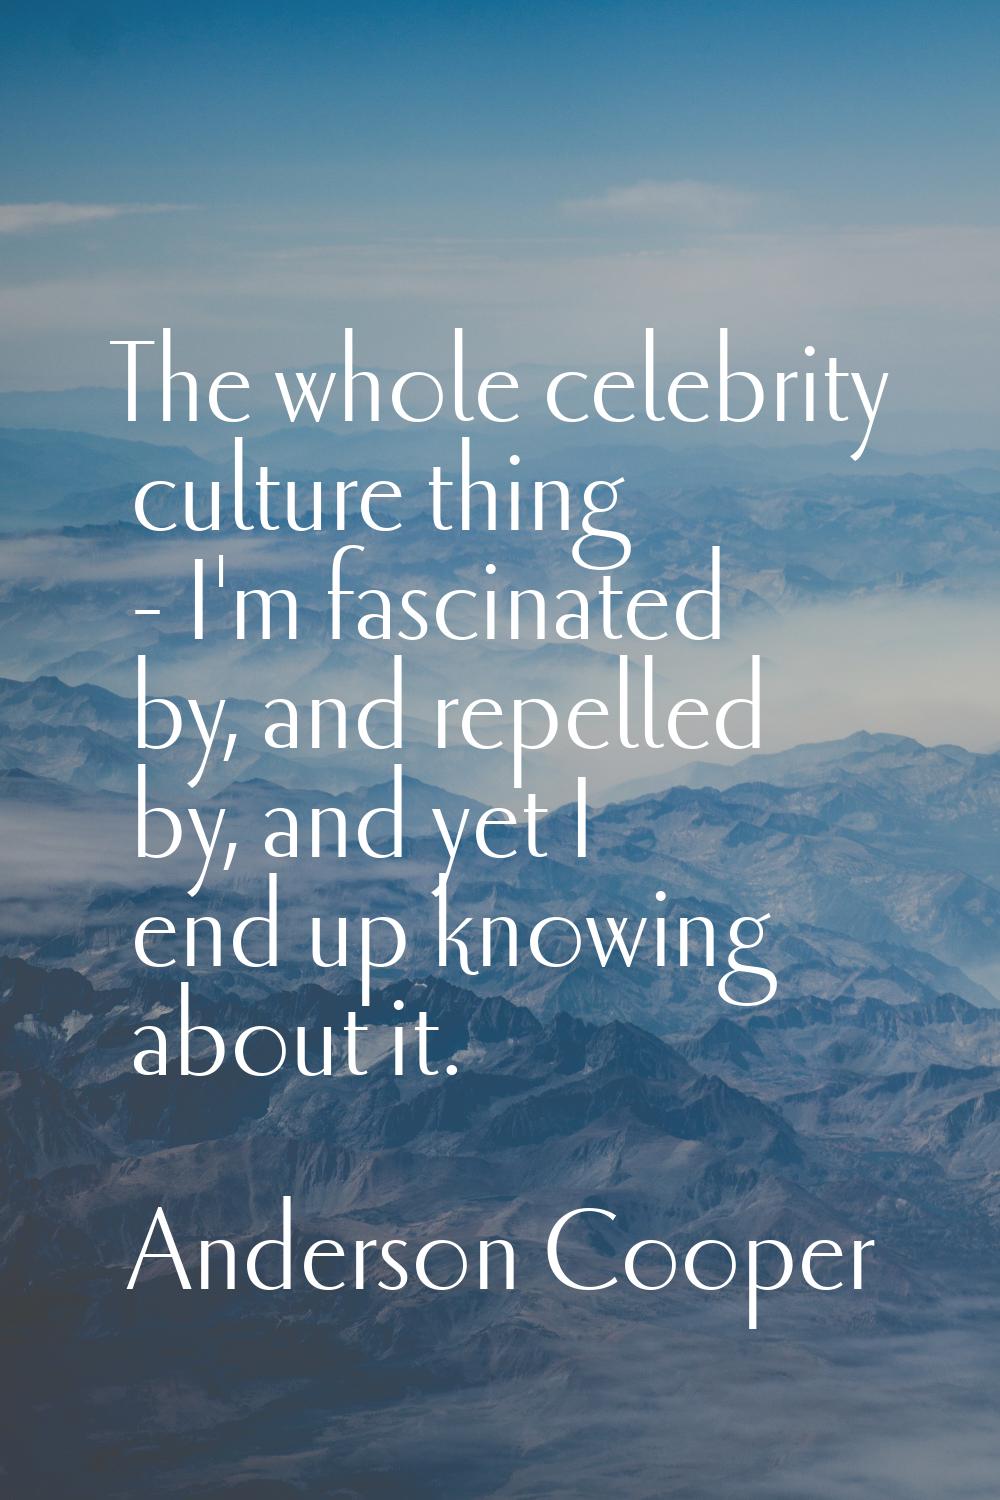 The whole celebrity culture thing - I'm fascinated by, and repelled by, and yet I end up knowing ab